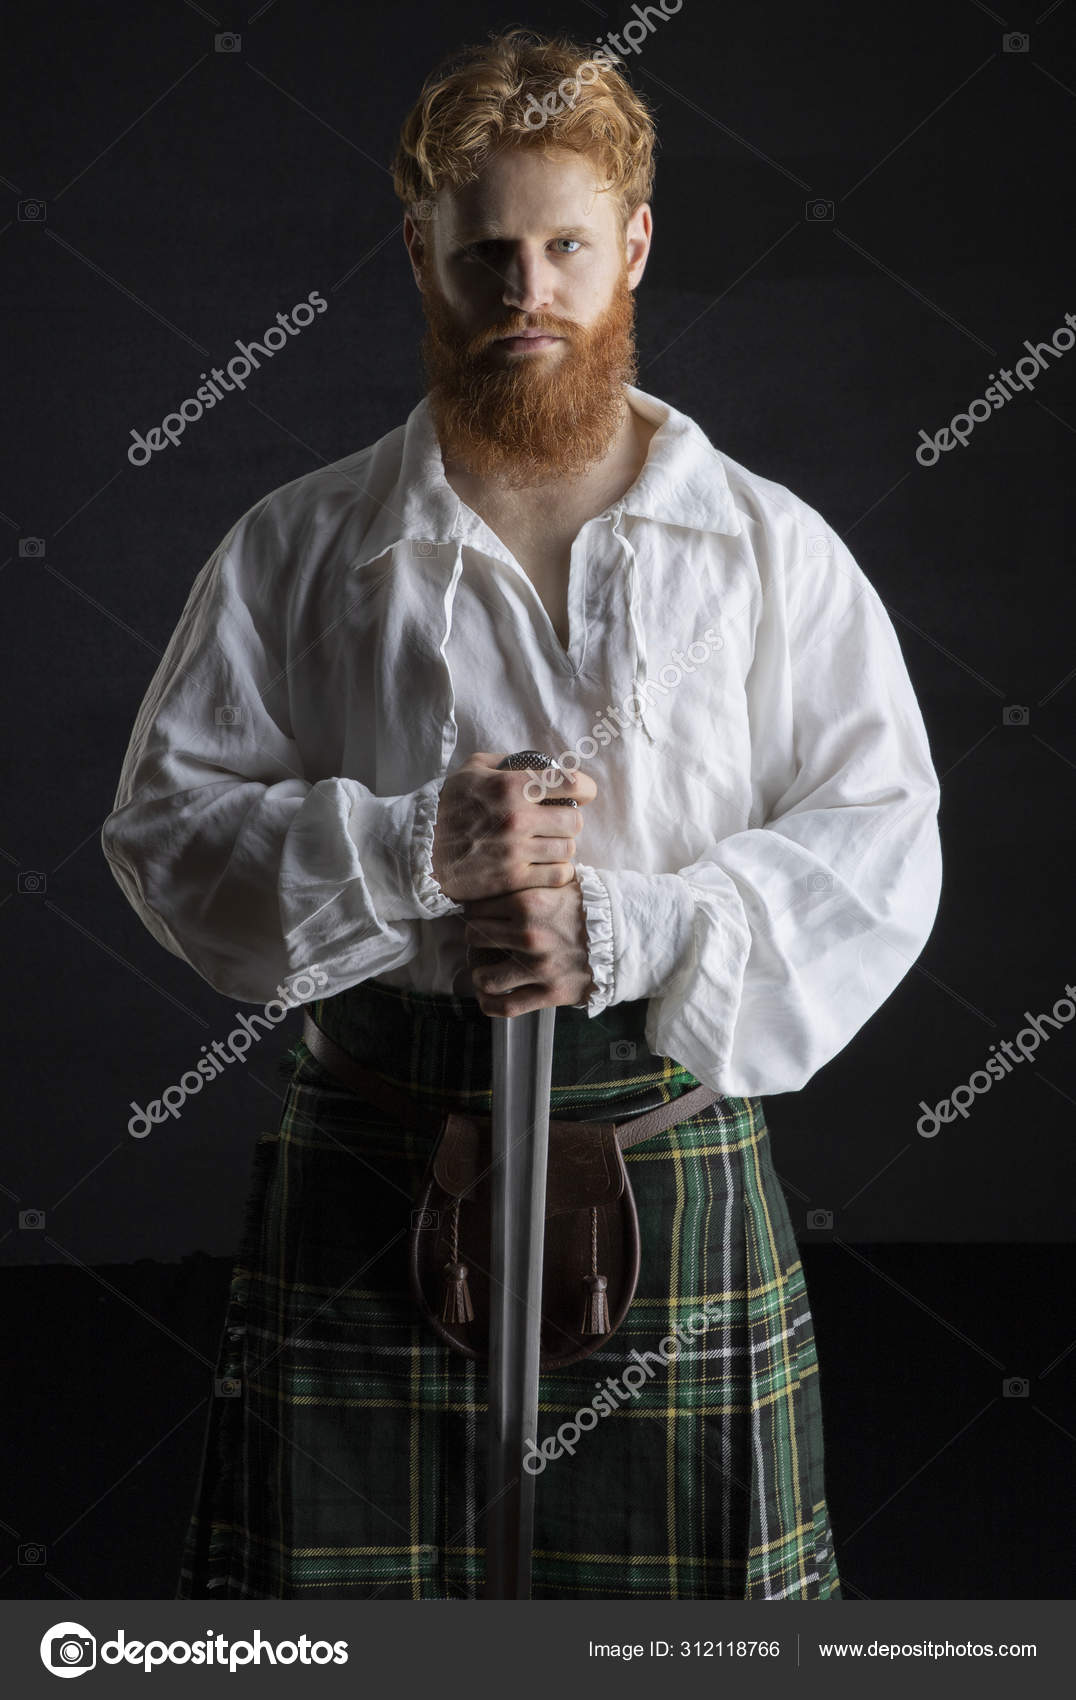 Young Scottish Man Red Hair Beard Stock Photo by ©kathysg 312118766